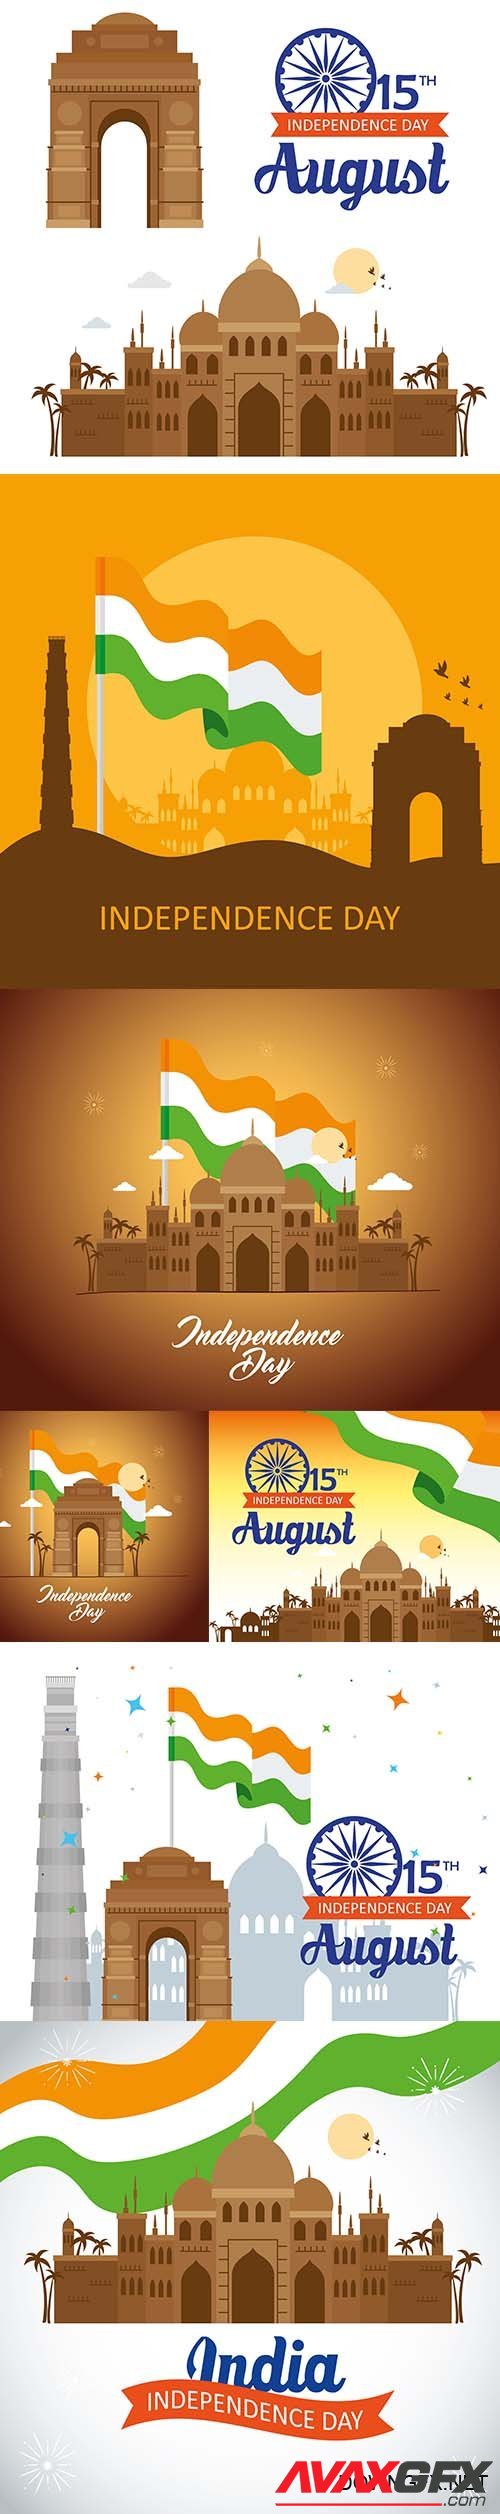 India Happy Independence Day Celebration Vector